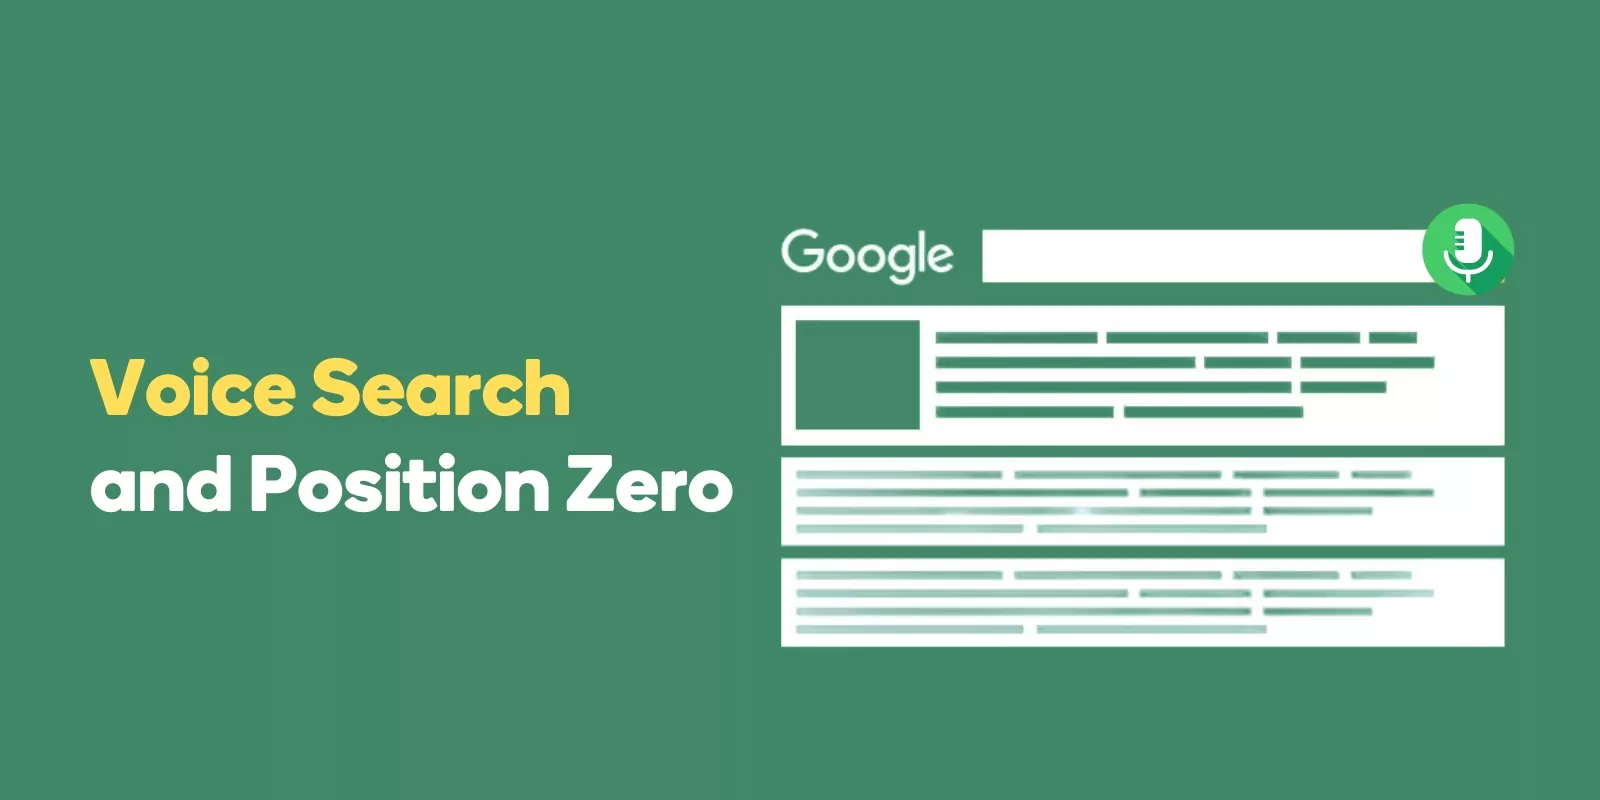 Voice Search and Position Zero